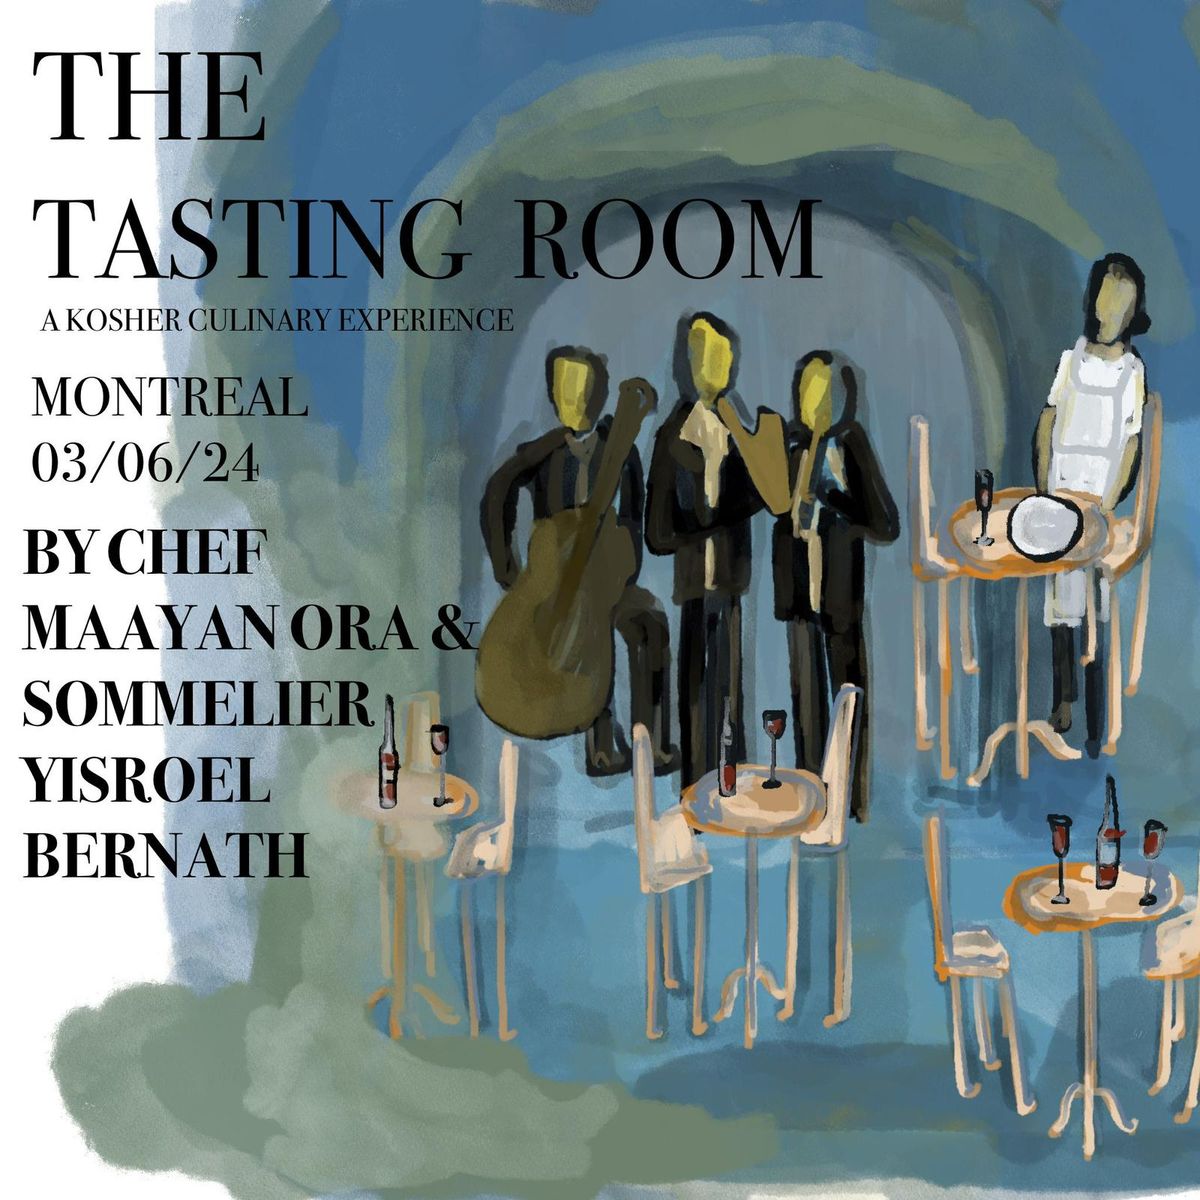 The Tasting Room: A kosher culinary experience